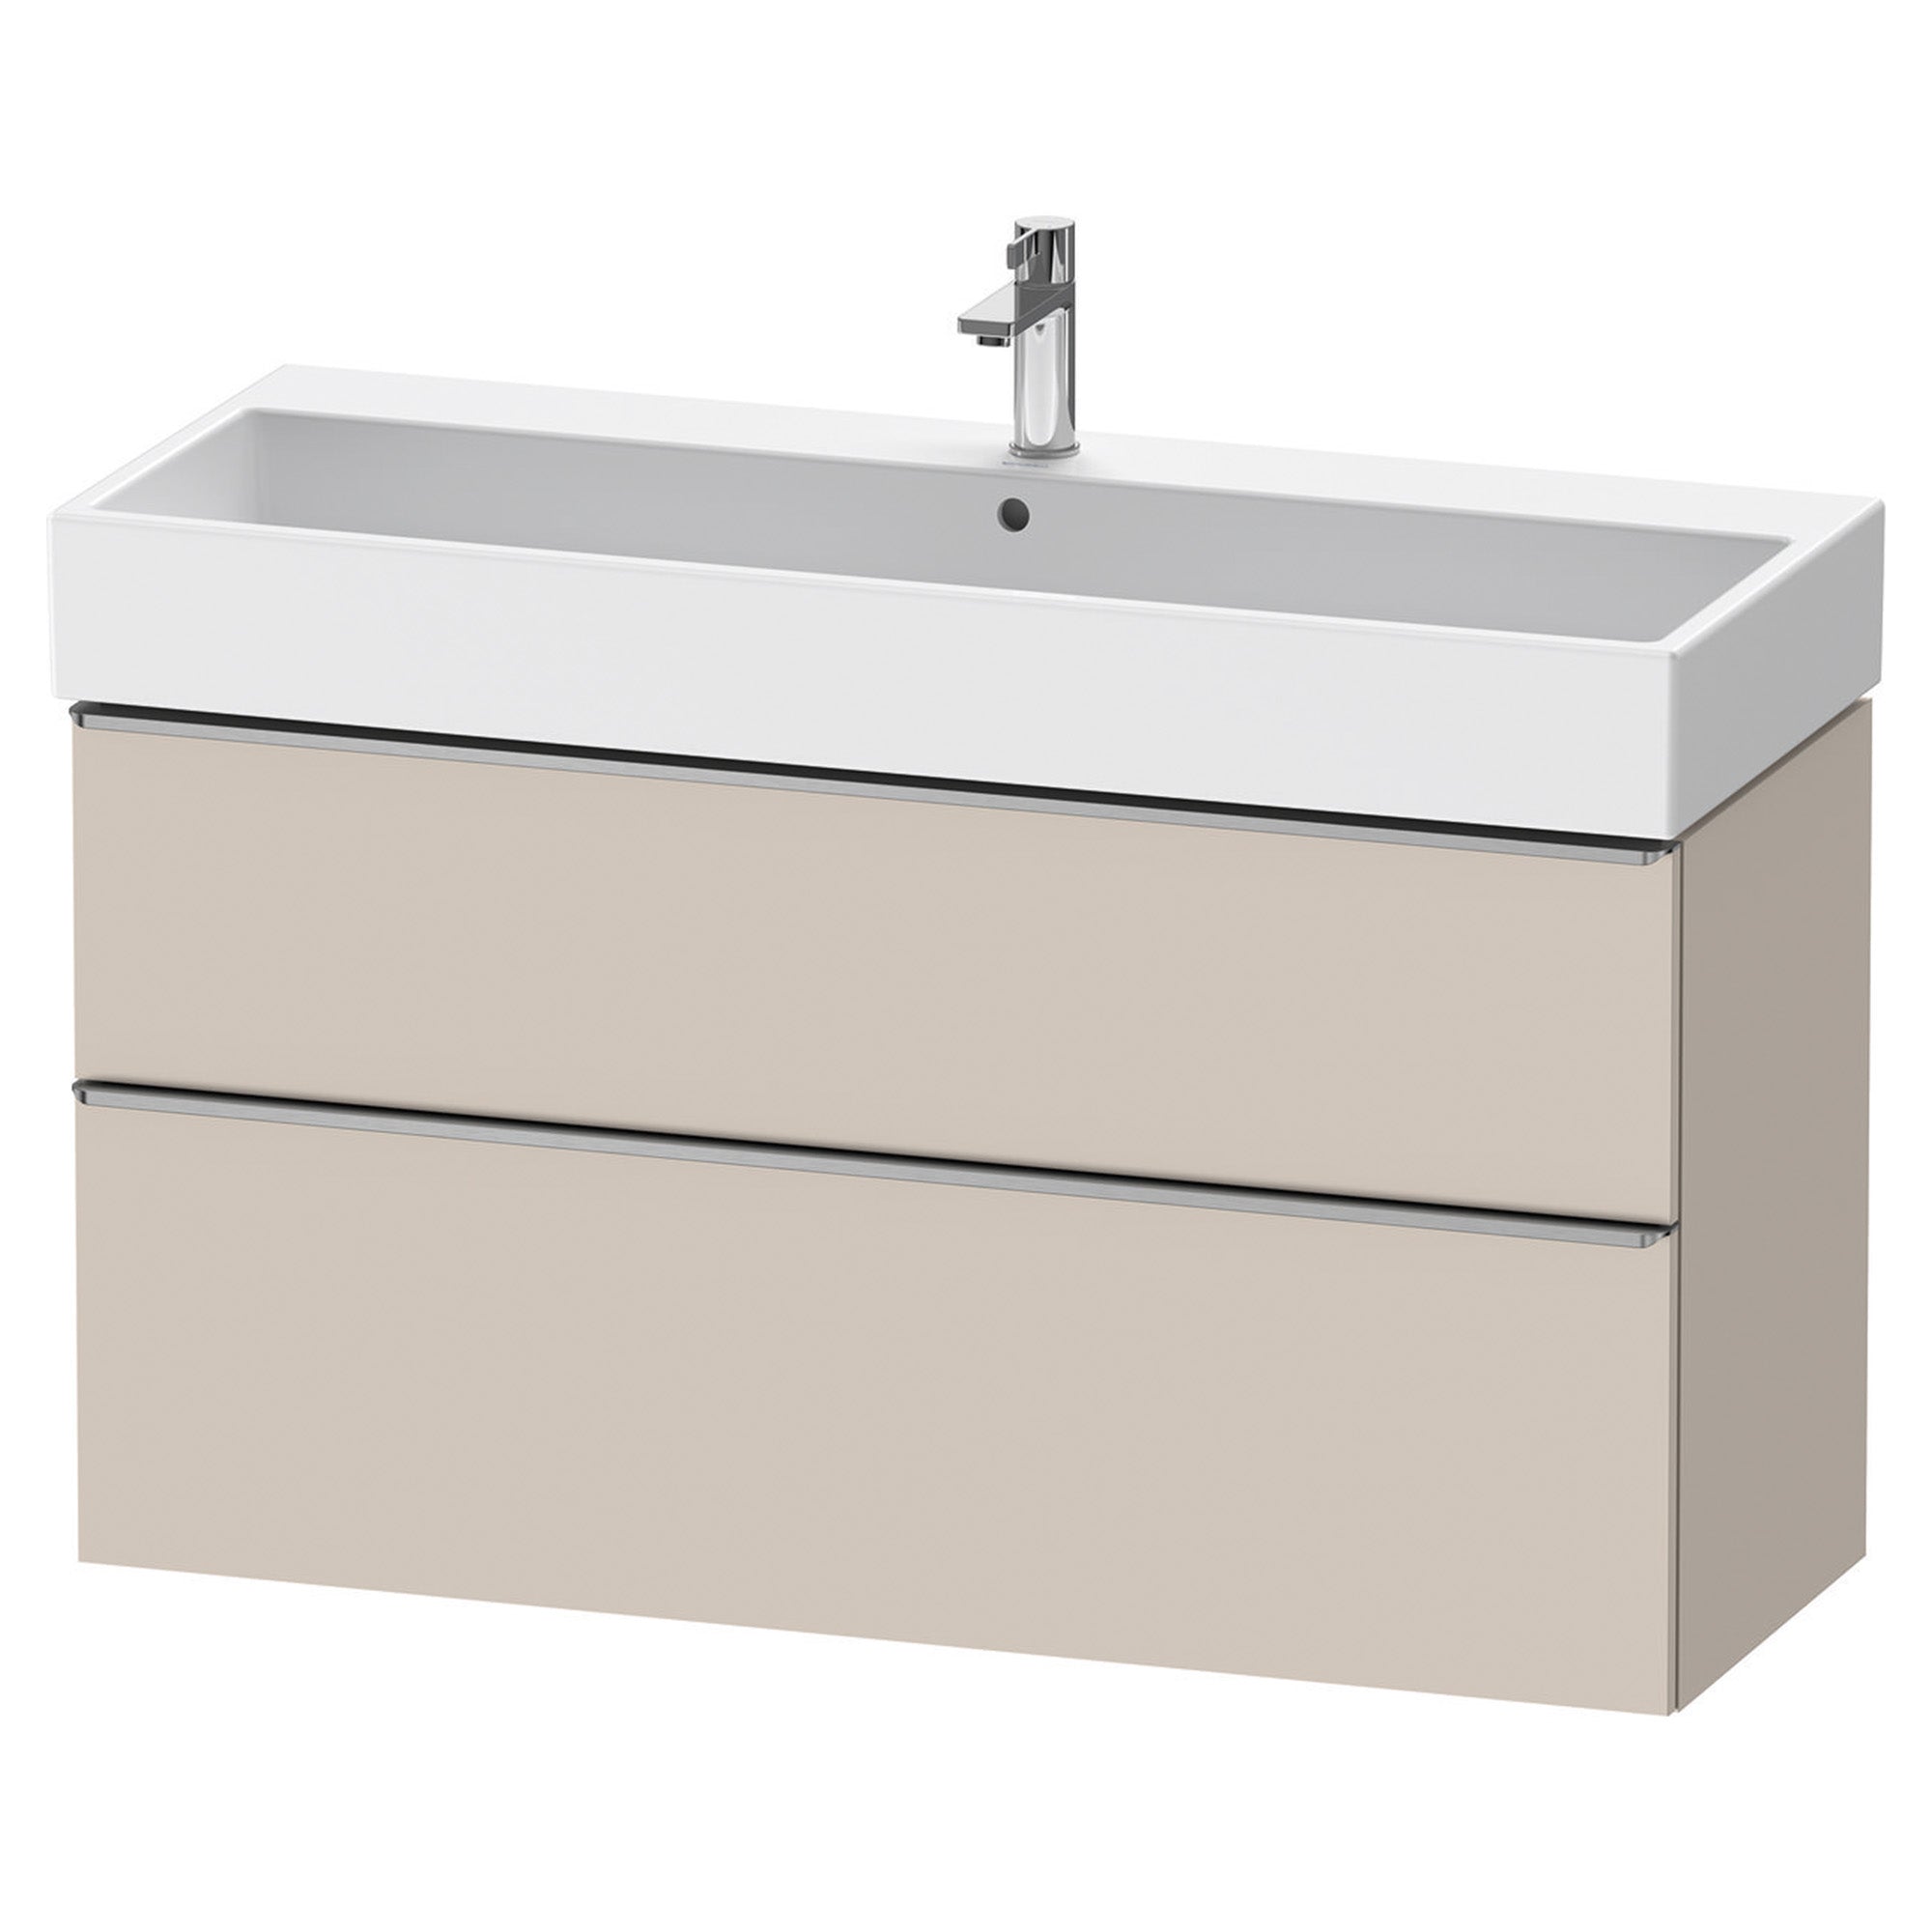 duravit d-neo 1200 wall mounted vanity unit with vero basin taupe stainless steel handles